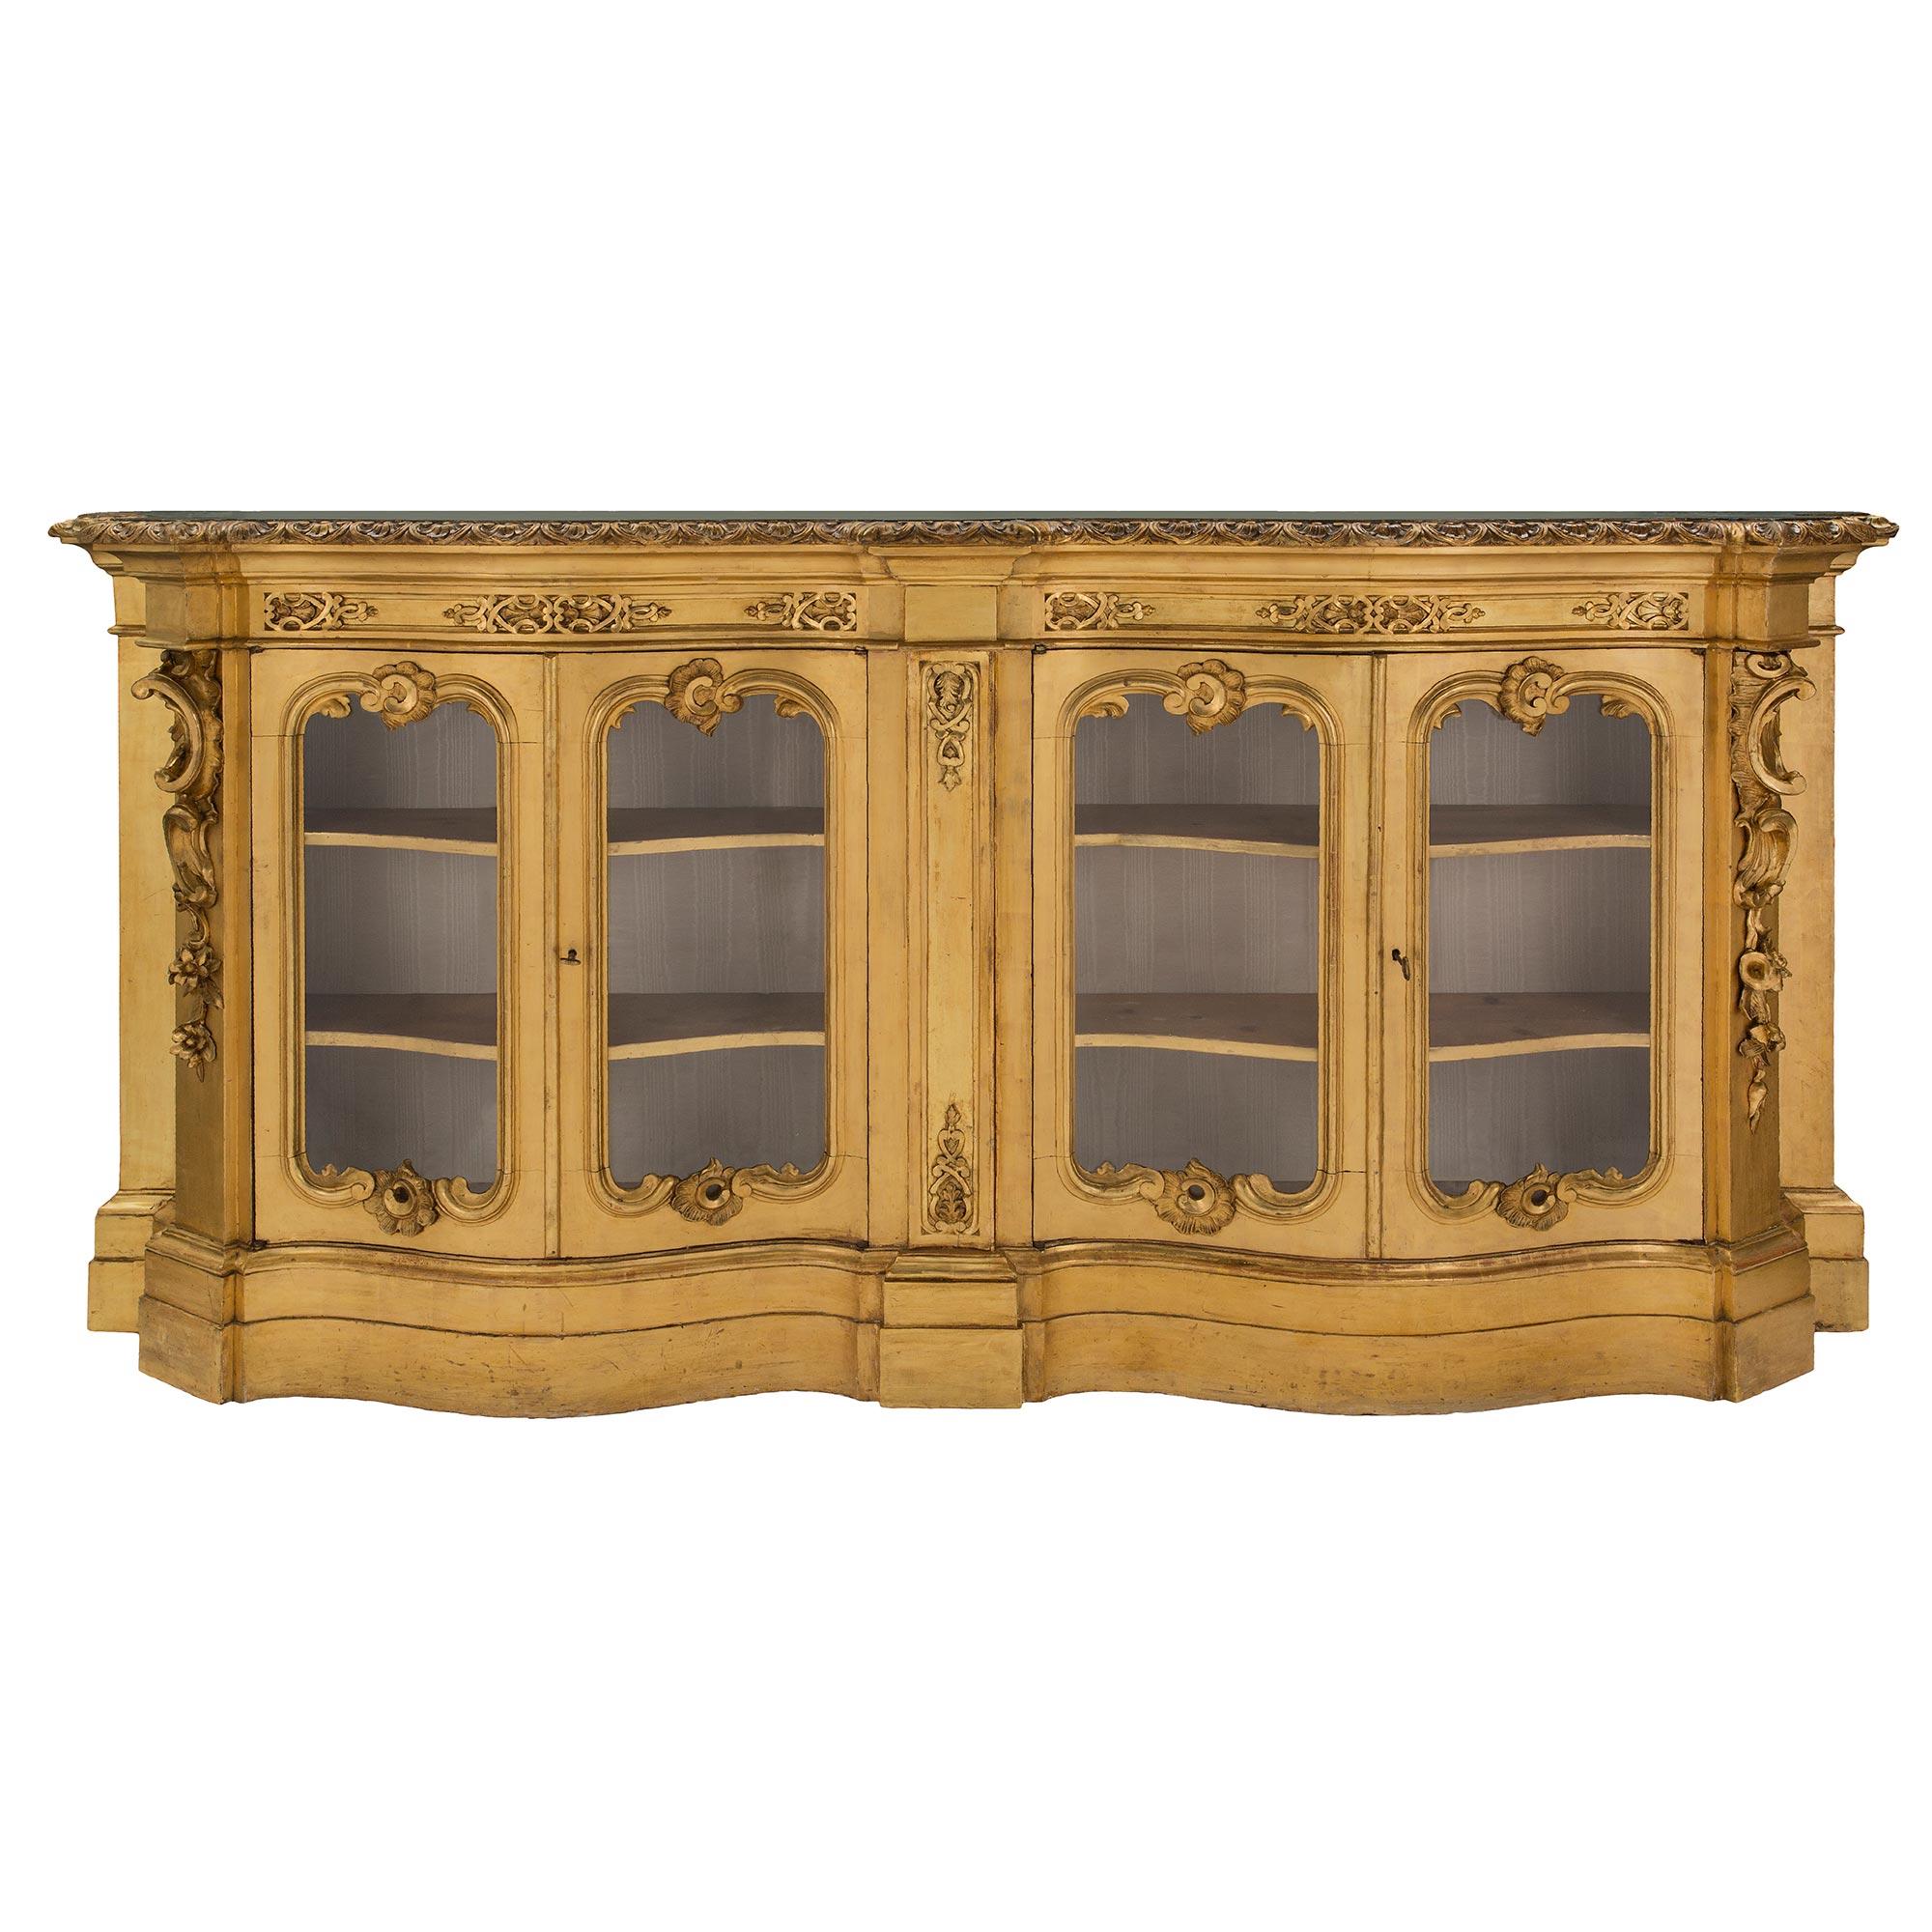 A stunning and large scale complimentary pair of Italian 19th century Venetian style giltwood vitrines. The most impressive and uniquely shallow vitrines are each raised by a bombée and scalloped shaped base with a decorative stepped design. At the